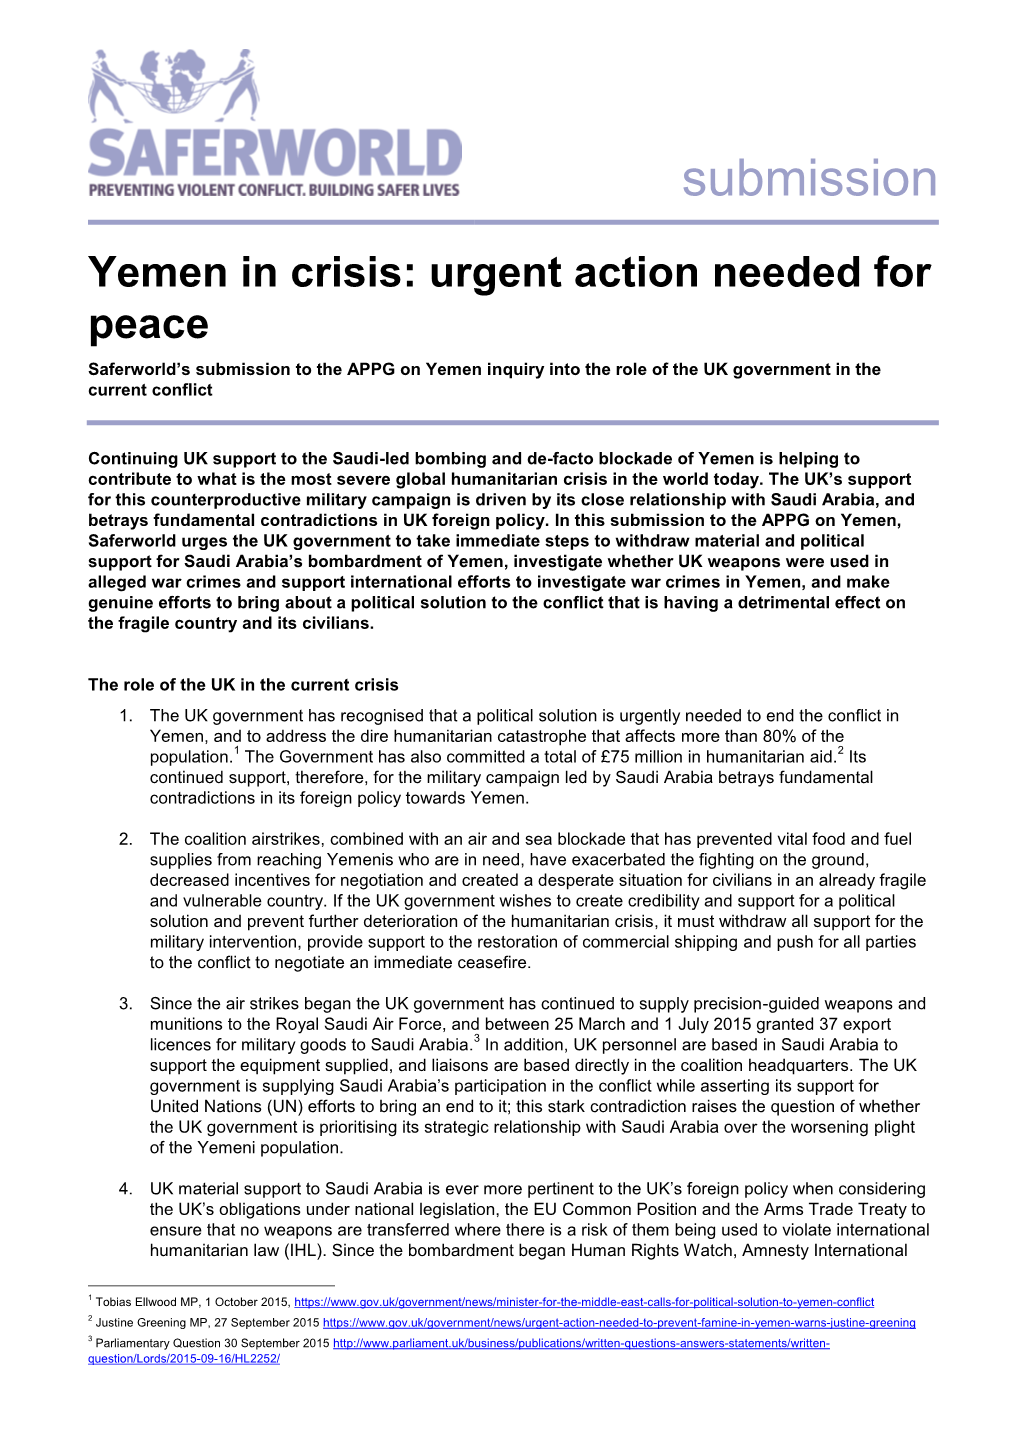 Yemen in Crisis: Urgent Action Needed for Peace Saferworld’S Submission to the APPG on Yemen Inquiry Into the Role of the UK Government in the Current Conflict